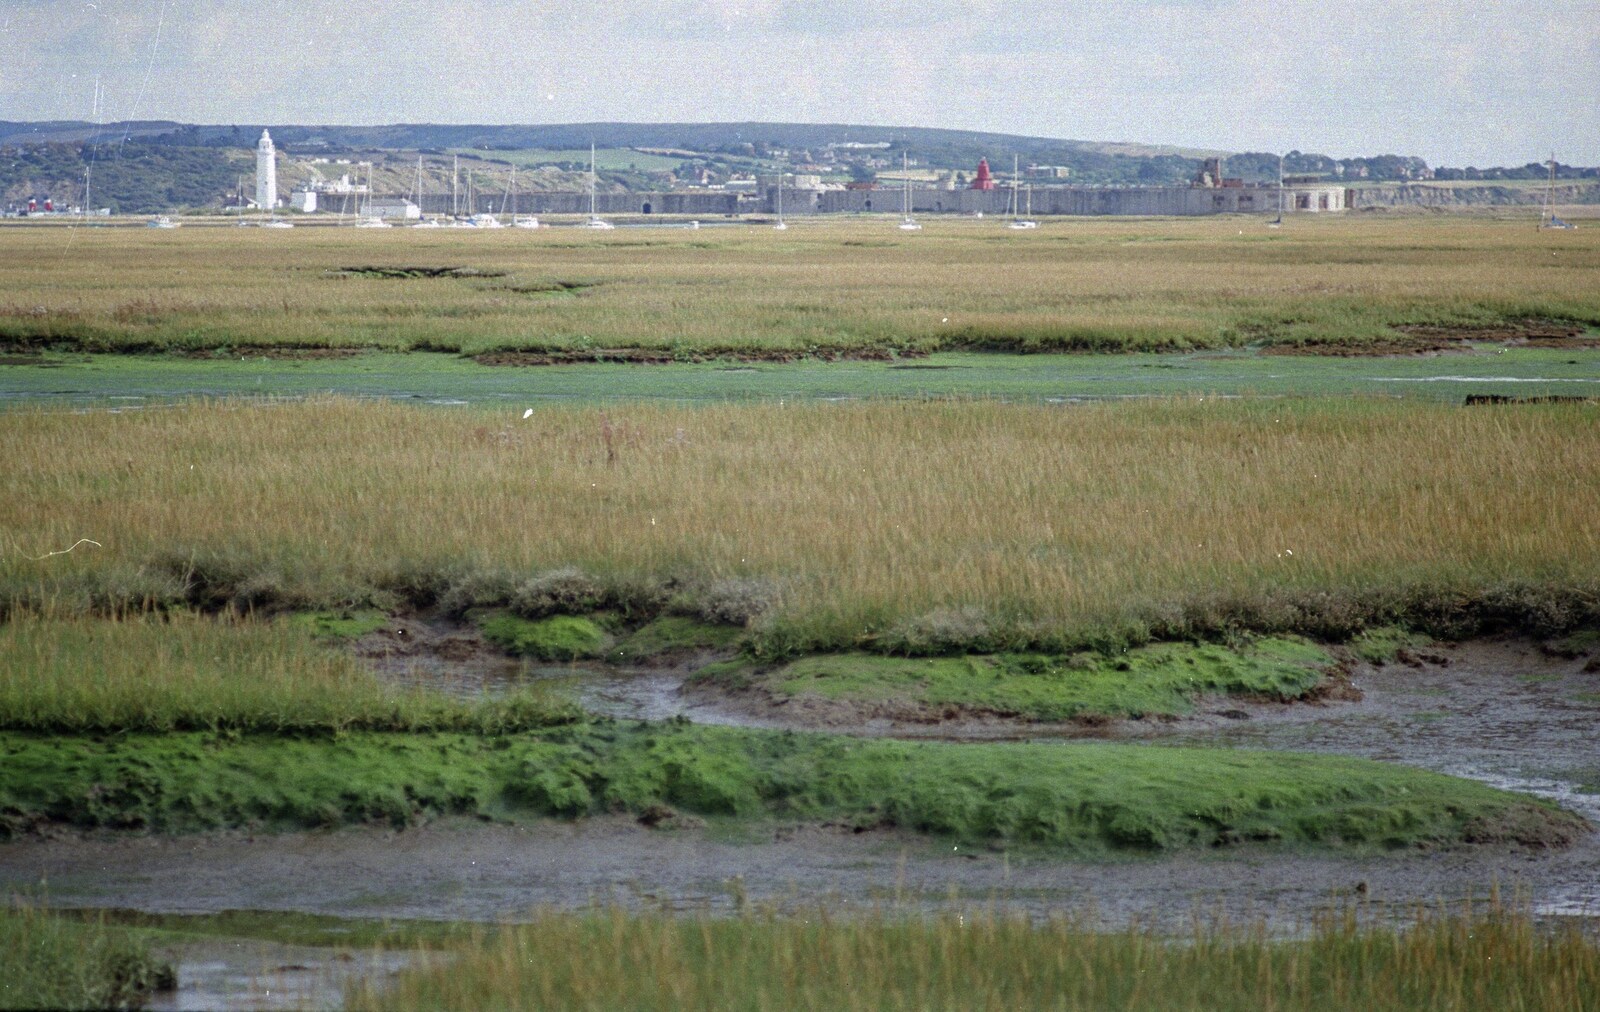 Grandmother's Seventieth Birthday, Brockenhurst and Keyhaven, Hampshire - 11th September 1994: Keyhaven Marshes, and Hurst Castle in the distance